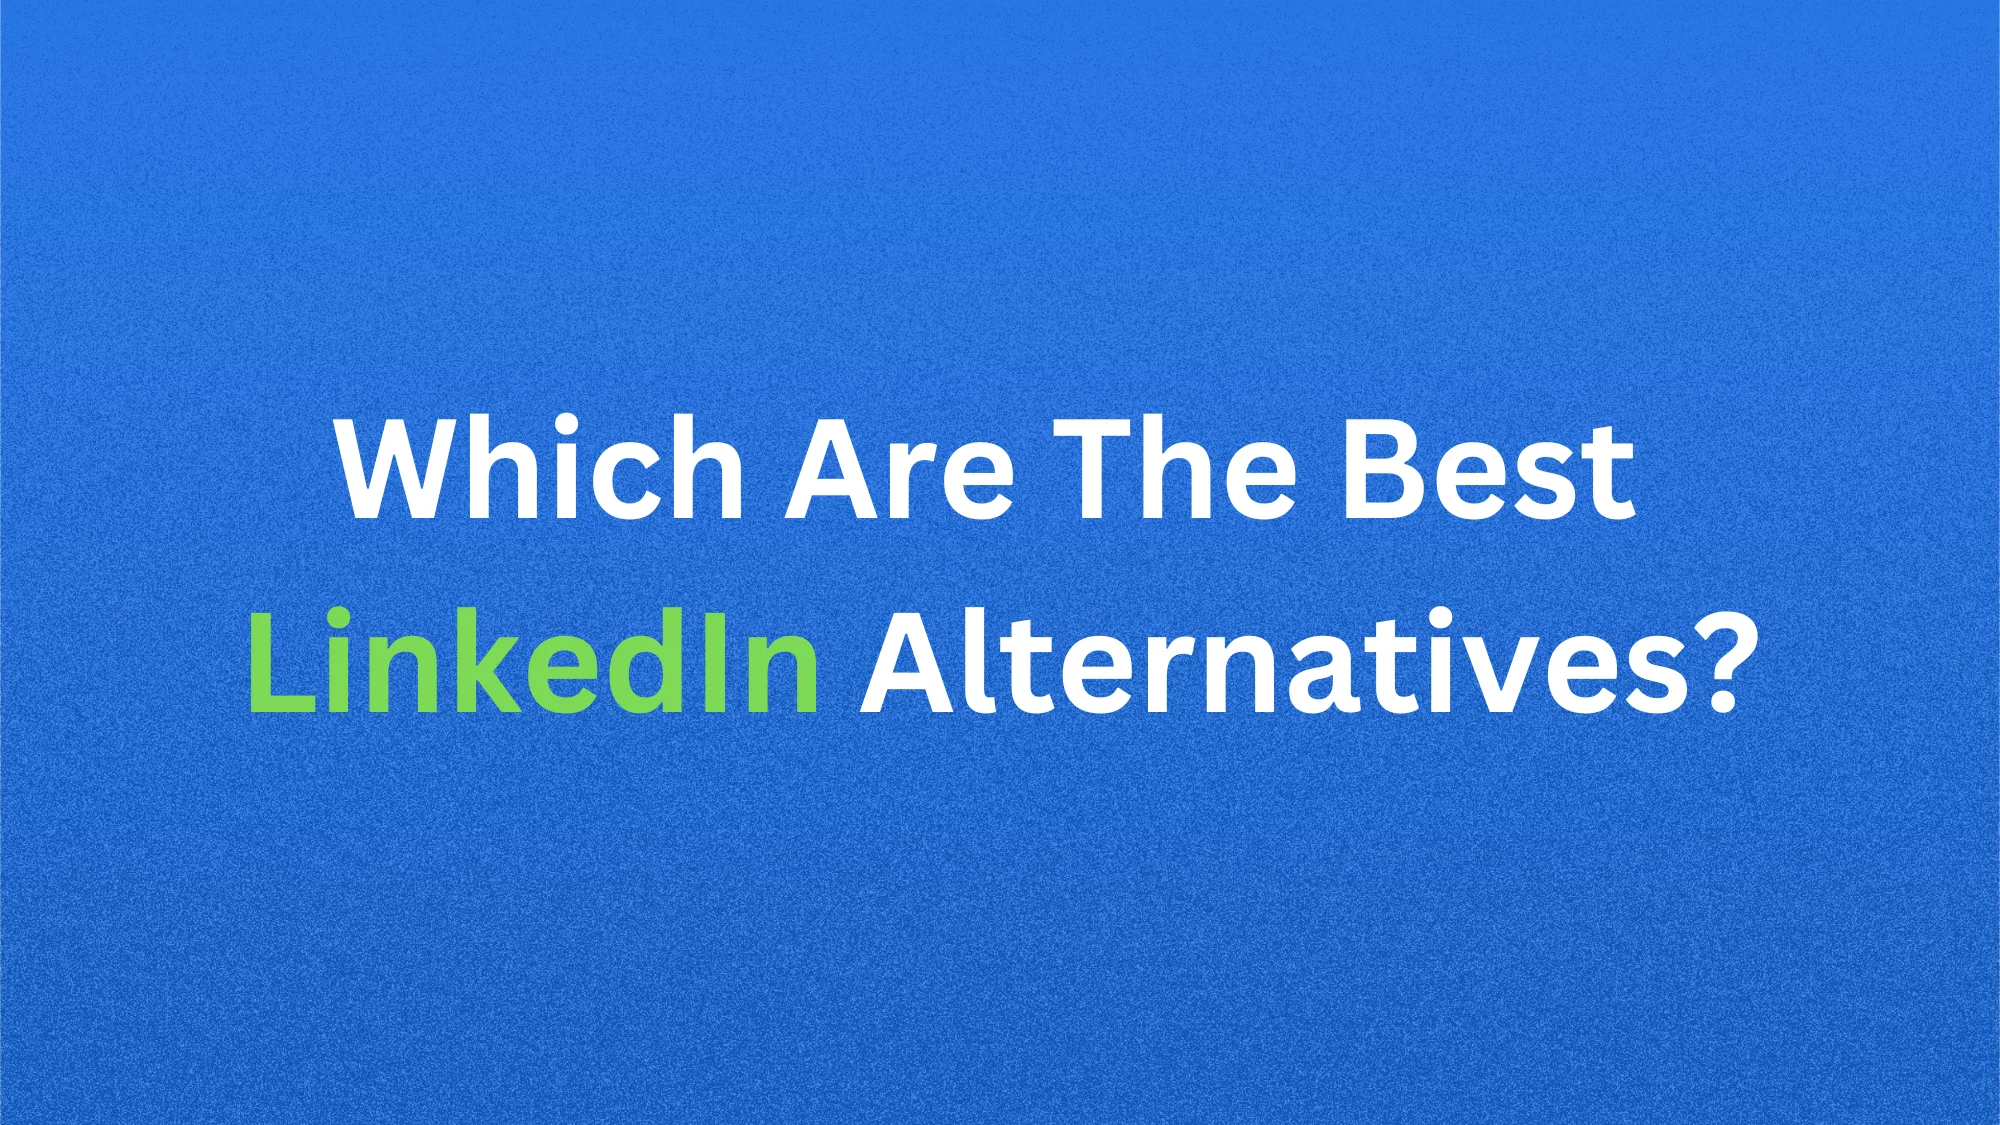 Which Are The Best LinkedIn Alternatives